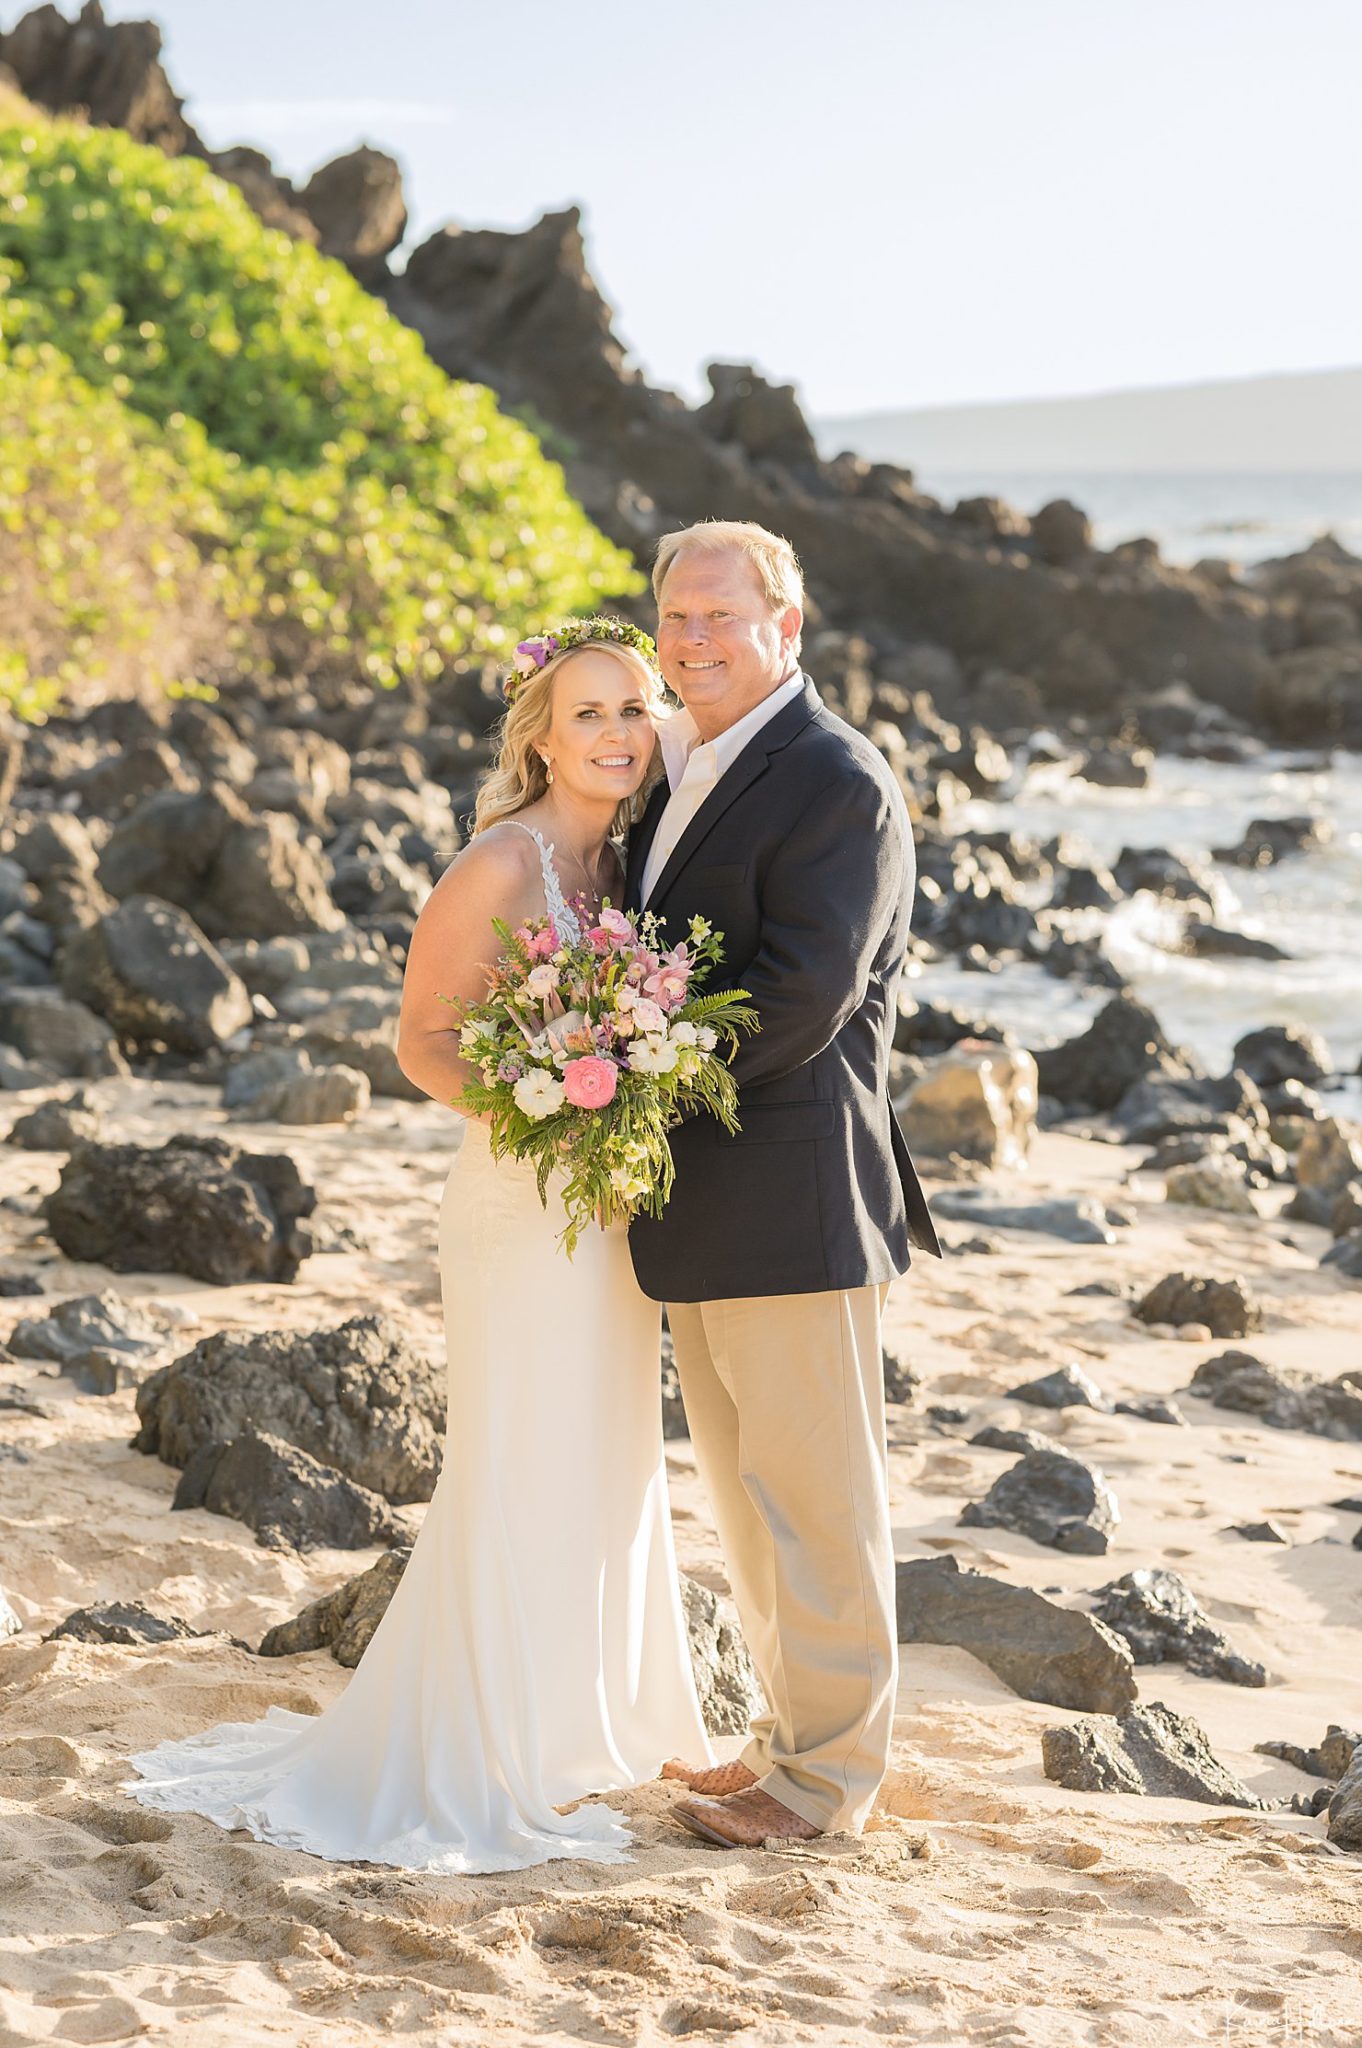 An Intimate Sunset Leah & Shannon Elope in Maui